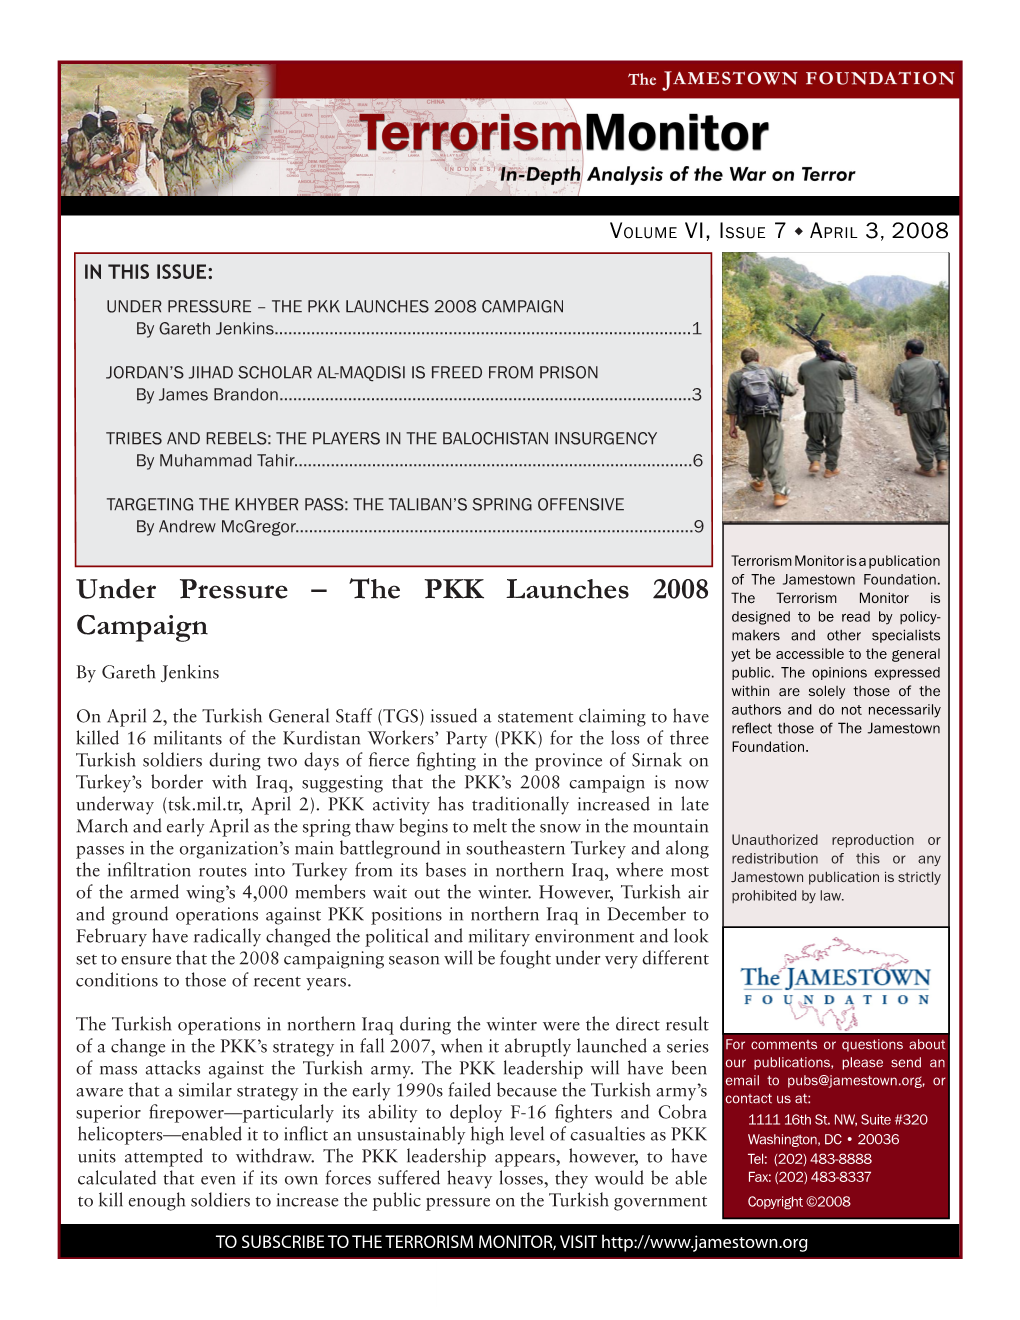 THE PKK LAUNCHES 2008 CAMPAIGN by Gareth Jenkins